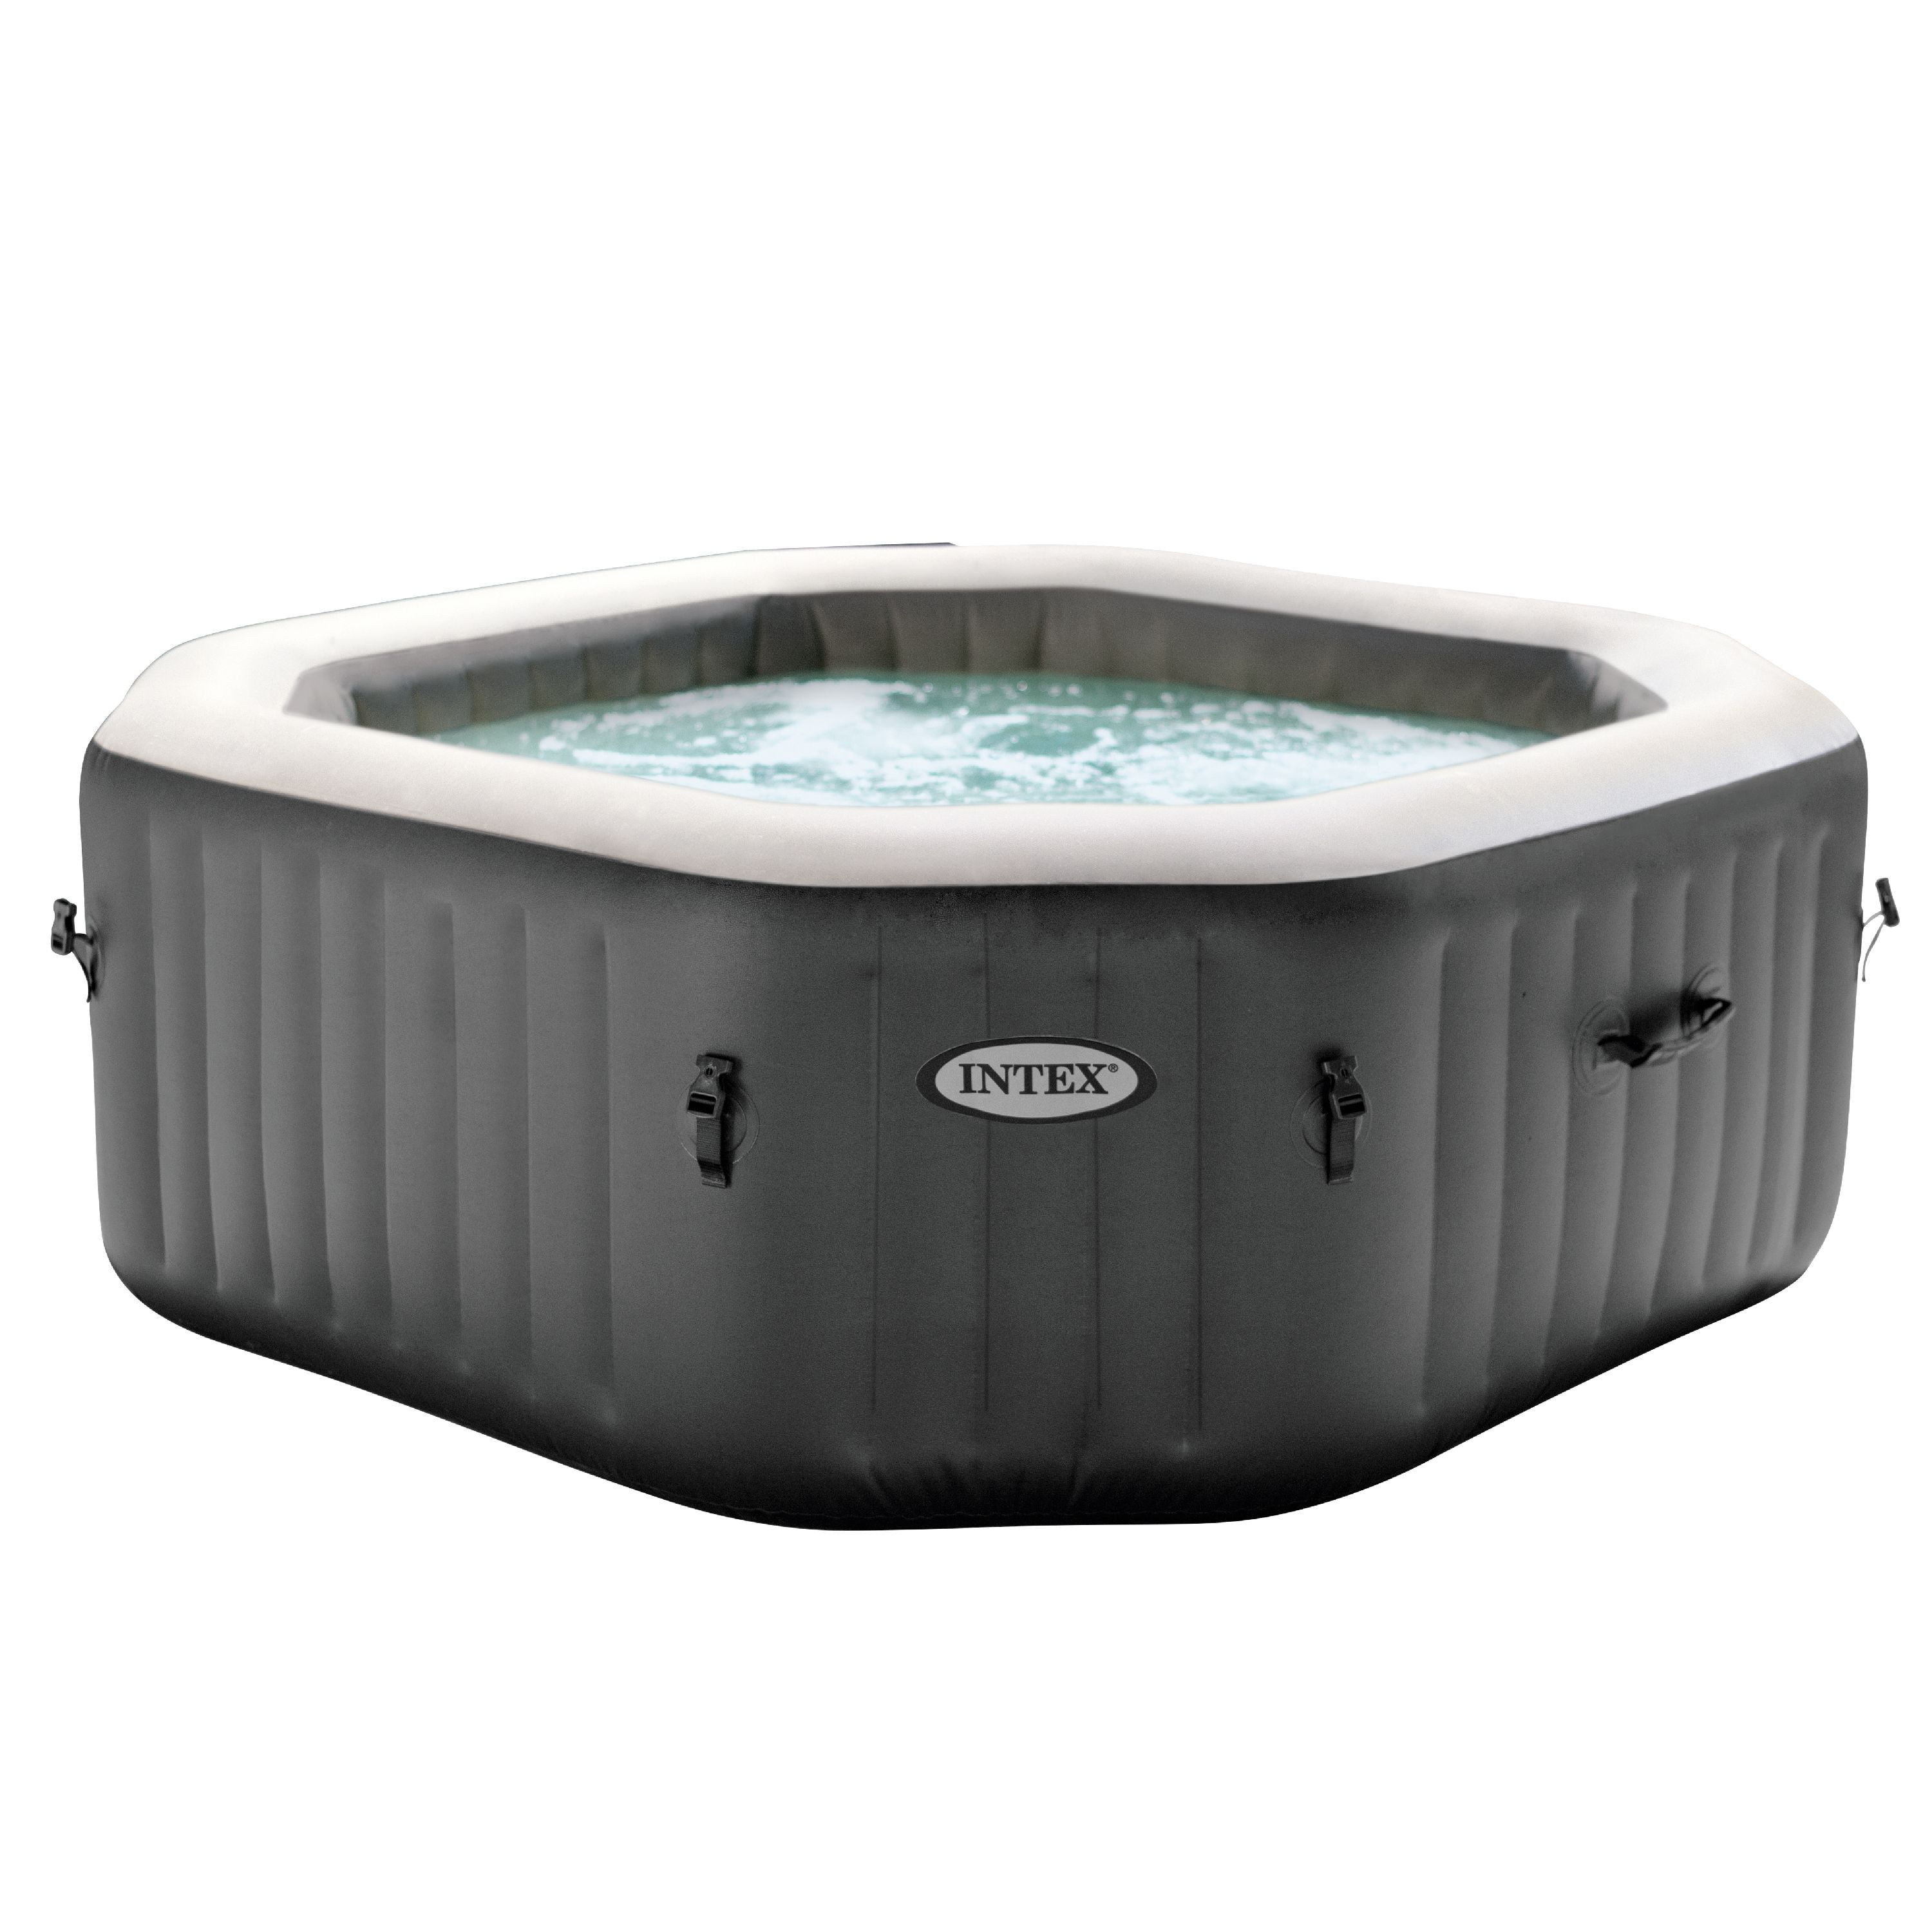 WEJOY AquaSpa Hot Tub Air Jet Spa 4-6 Person Blow Up Portable Hot Tub with  130 Bubble Jets Inflatable Outdoor Heated Round Hot Tub Spa - Yahoo Shopping